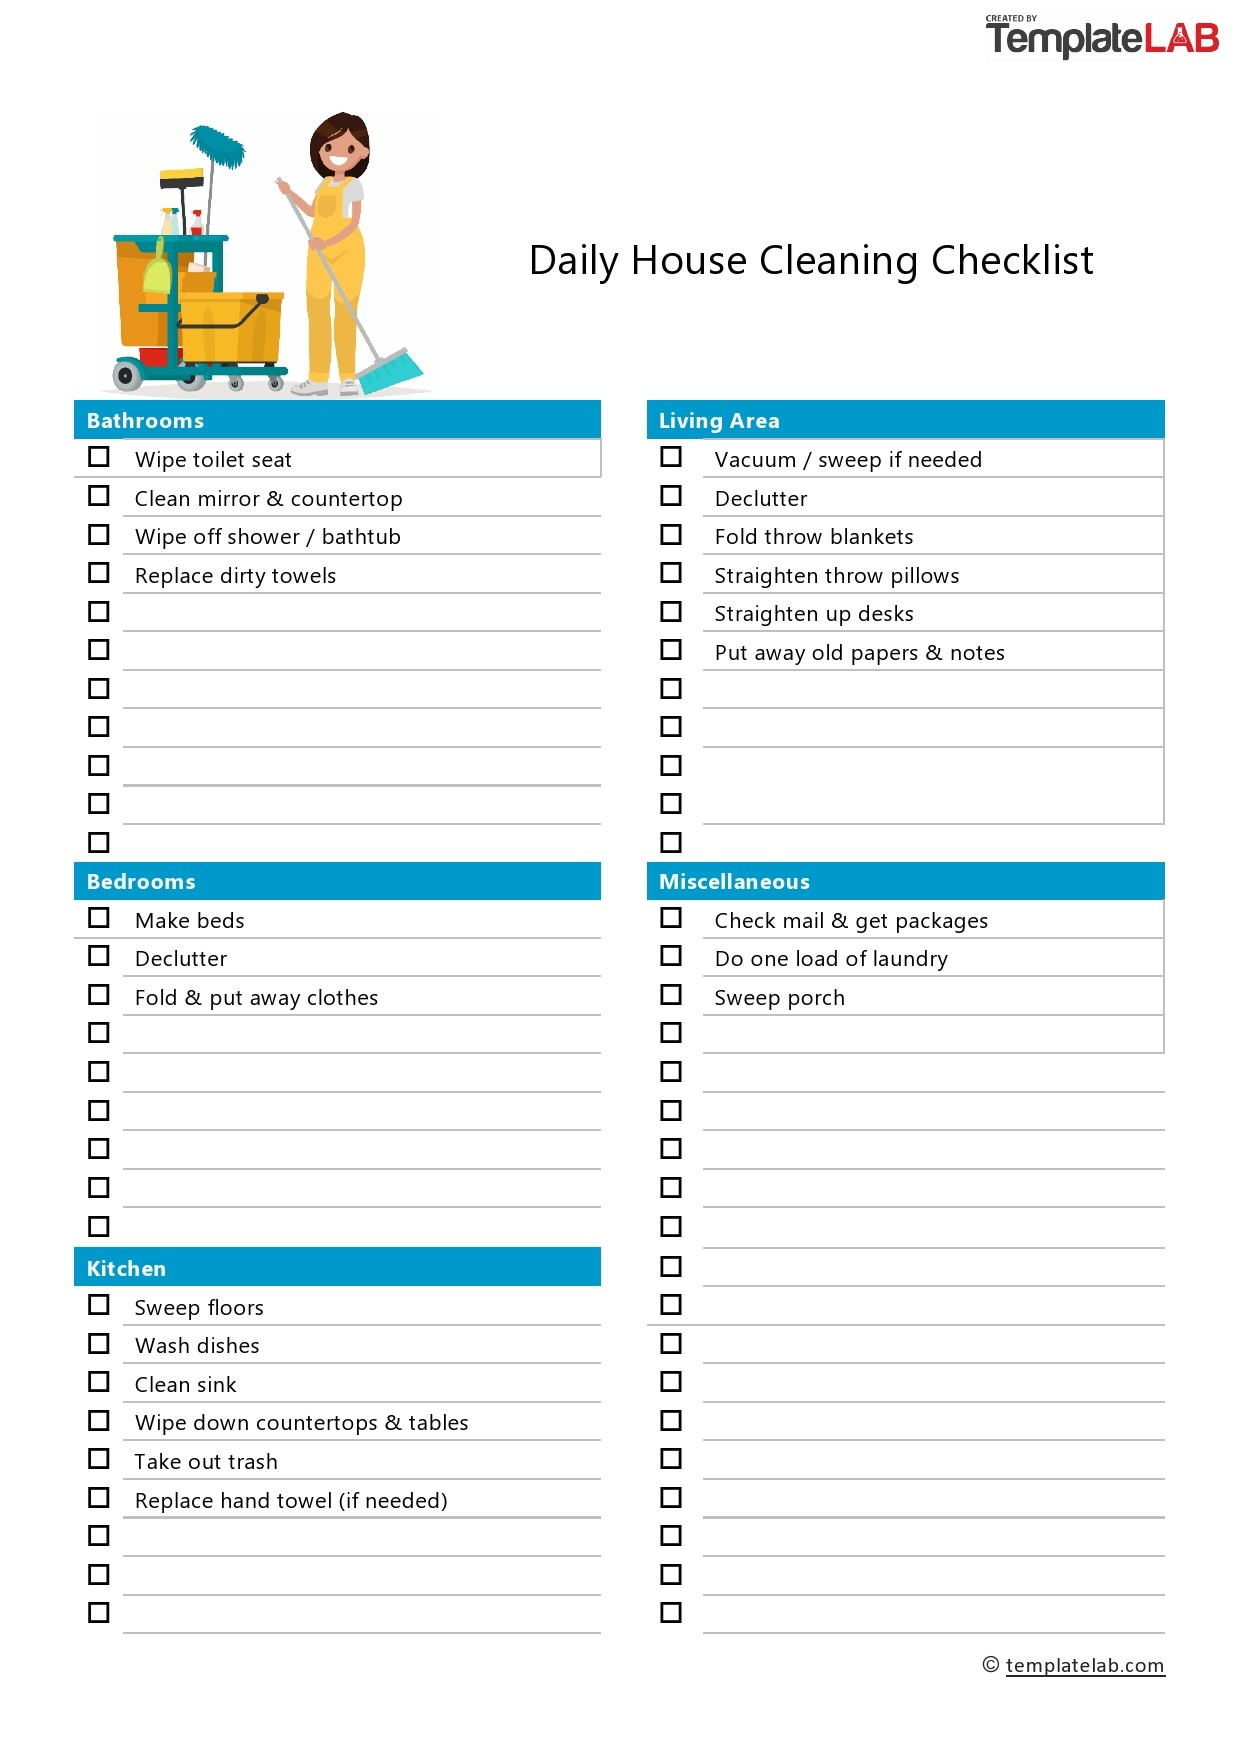 11 Printable House Cleaning Checklist Templates ᐅ TemplateLab In Cleaning Services Checklist Template Throughout Cleaning Services Checklist Template